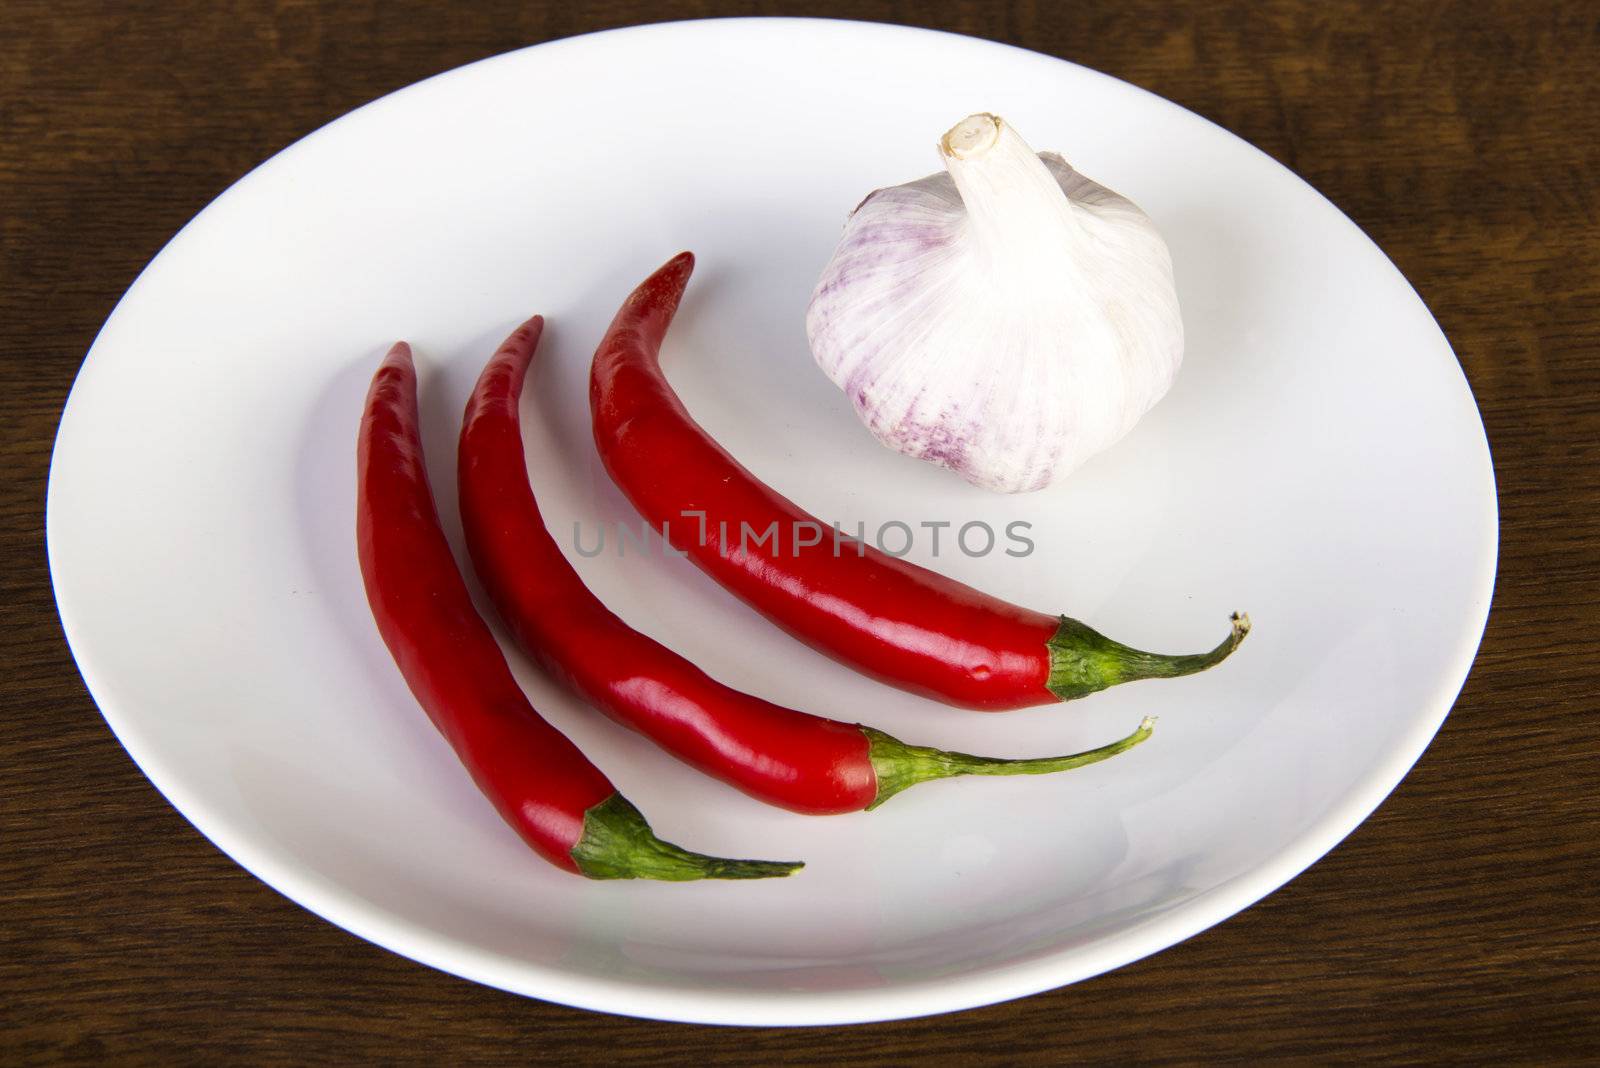 Red chili peppers and garlic by BDS